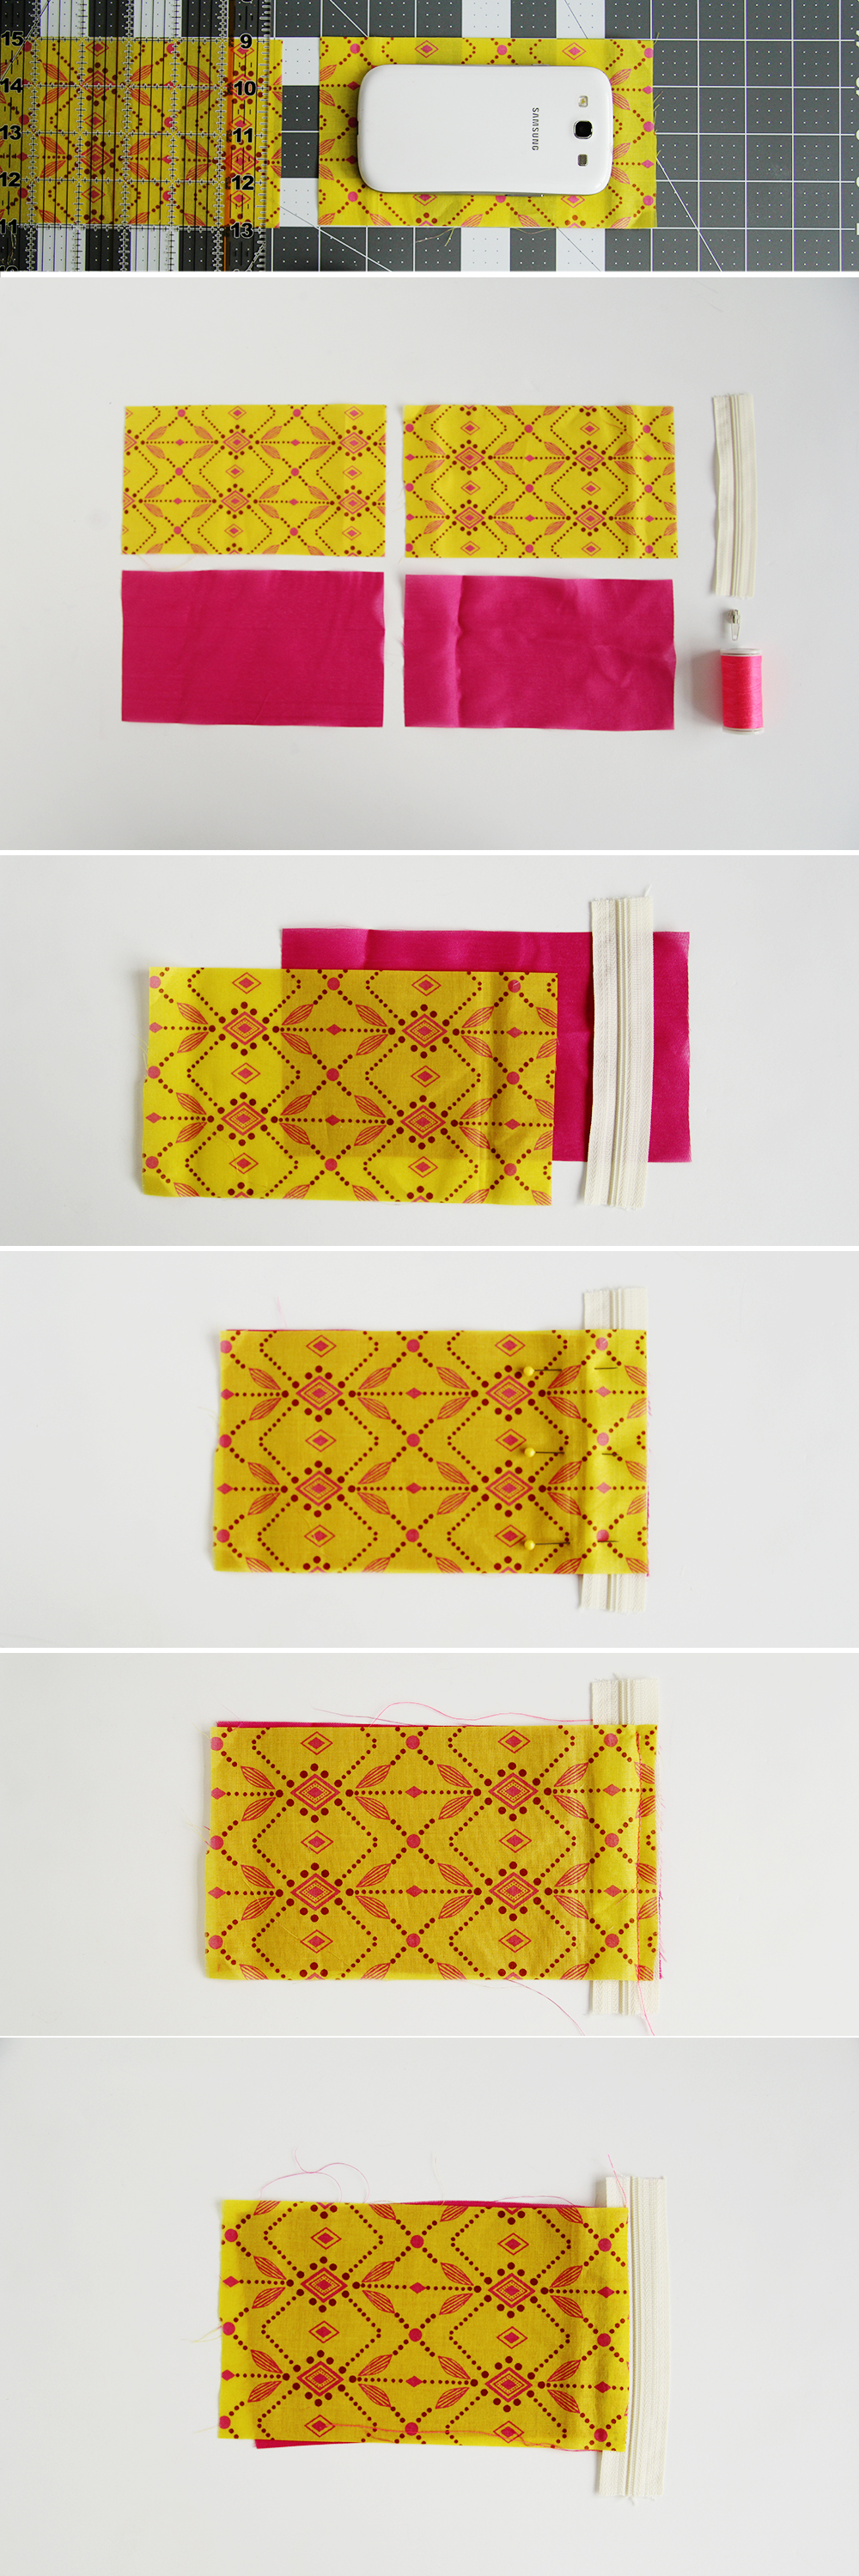 How To Make Zipper Pouches Online